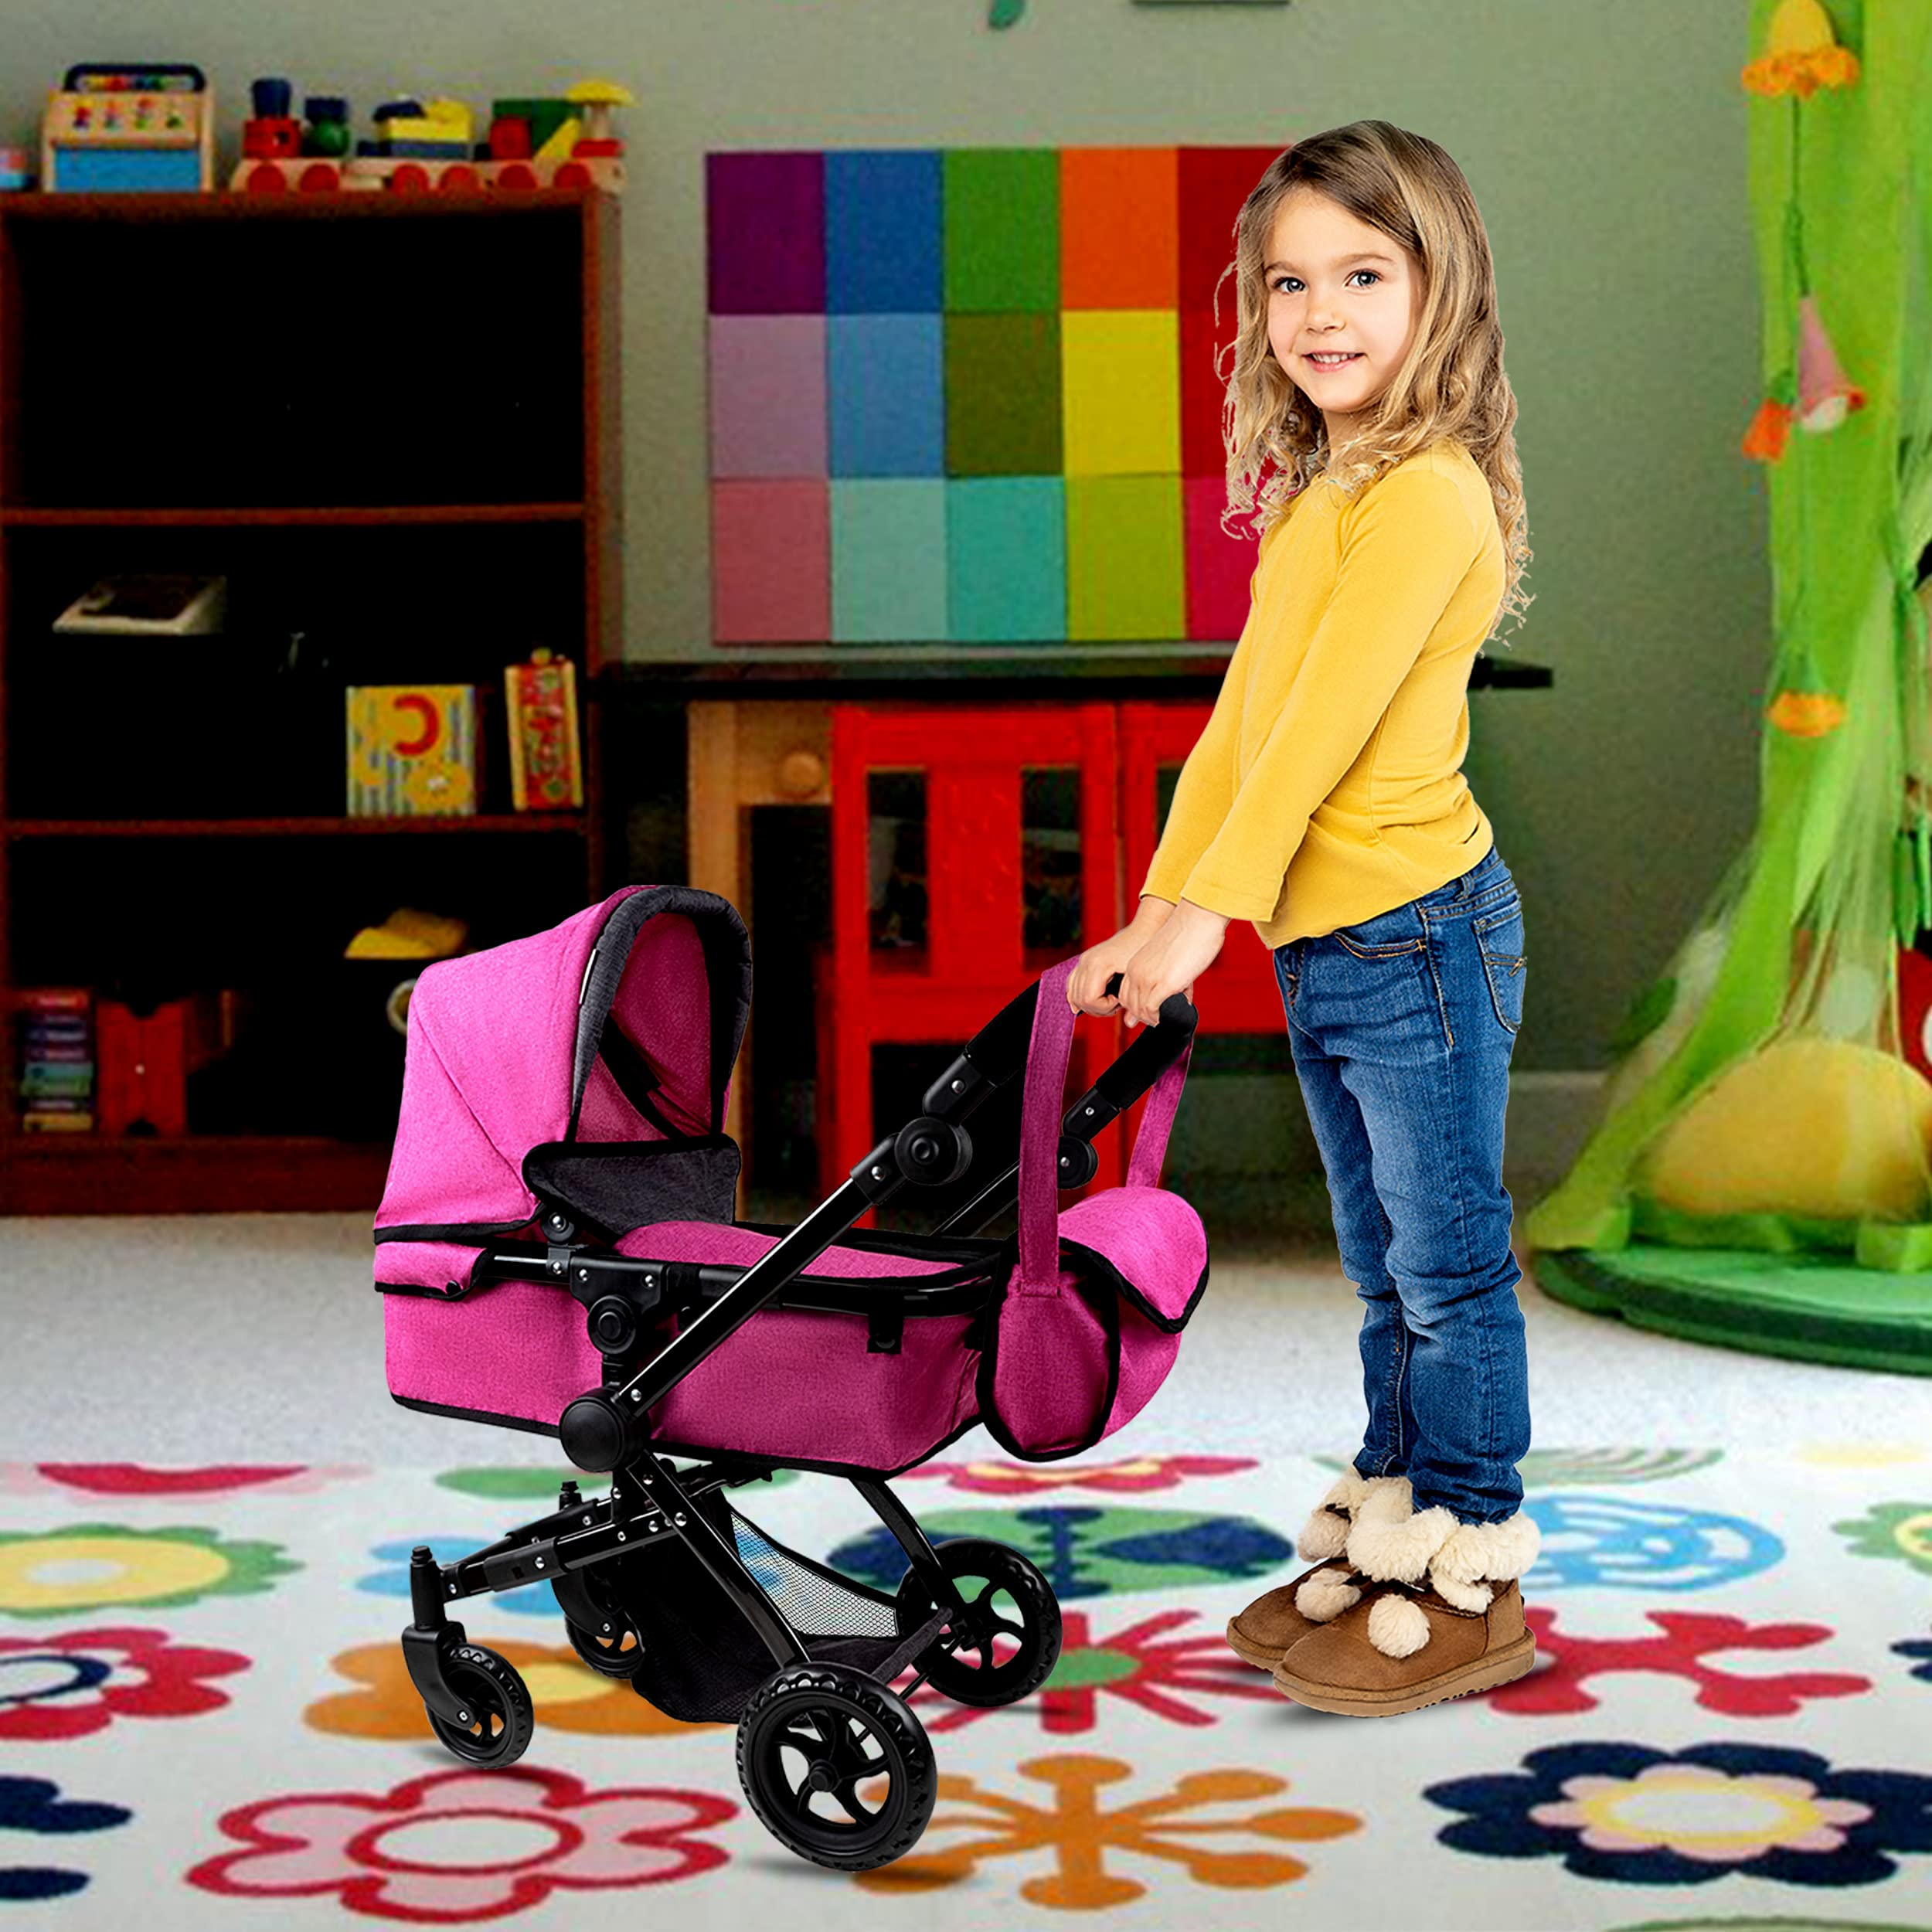 Fash n Kolor Baby Doll Stroller My First Foldable Doll Stroller in Denim Hot Pink Design, Bassinet Stroller with Baby Doll Adjustable Handle, Convertible Seat, Basket, and Free Carriage Bag